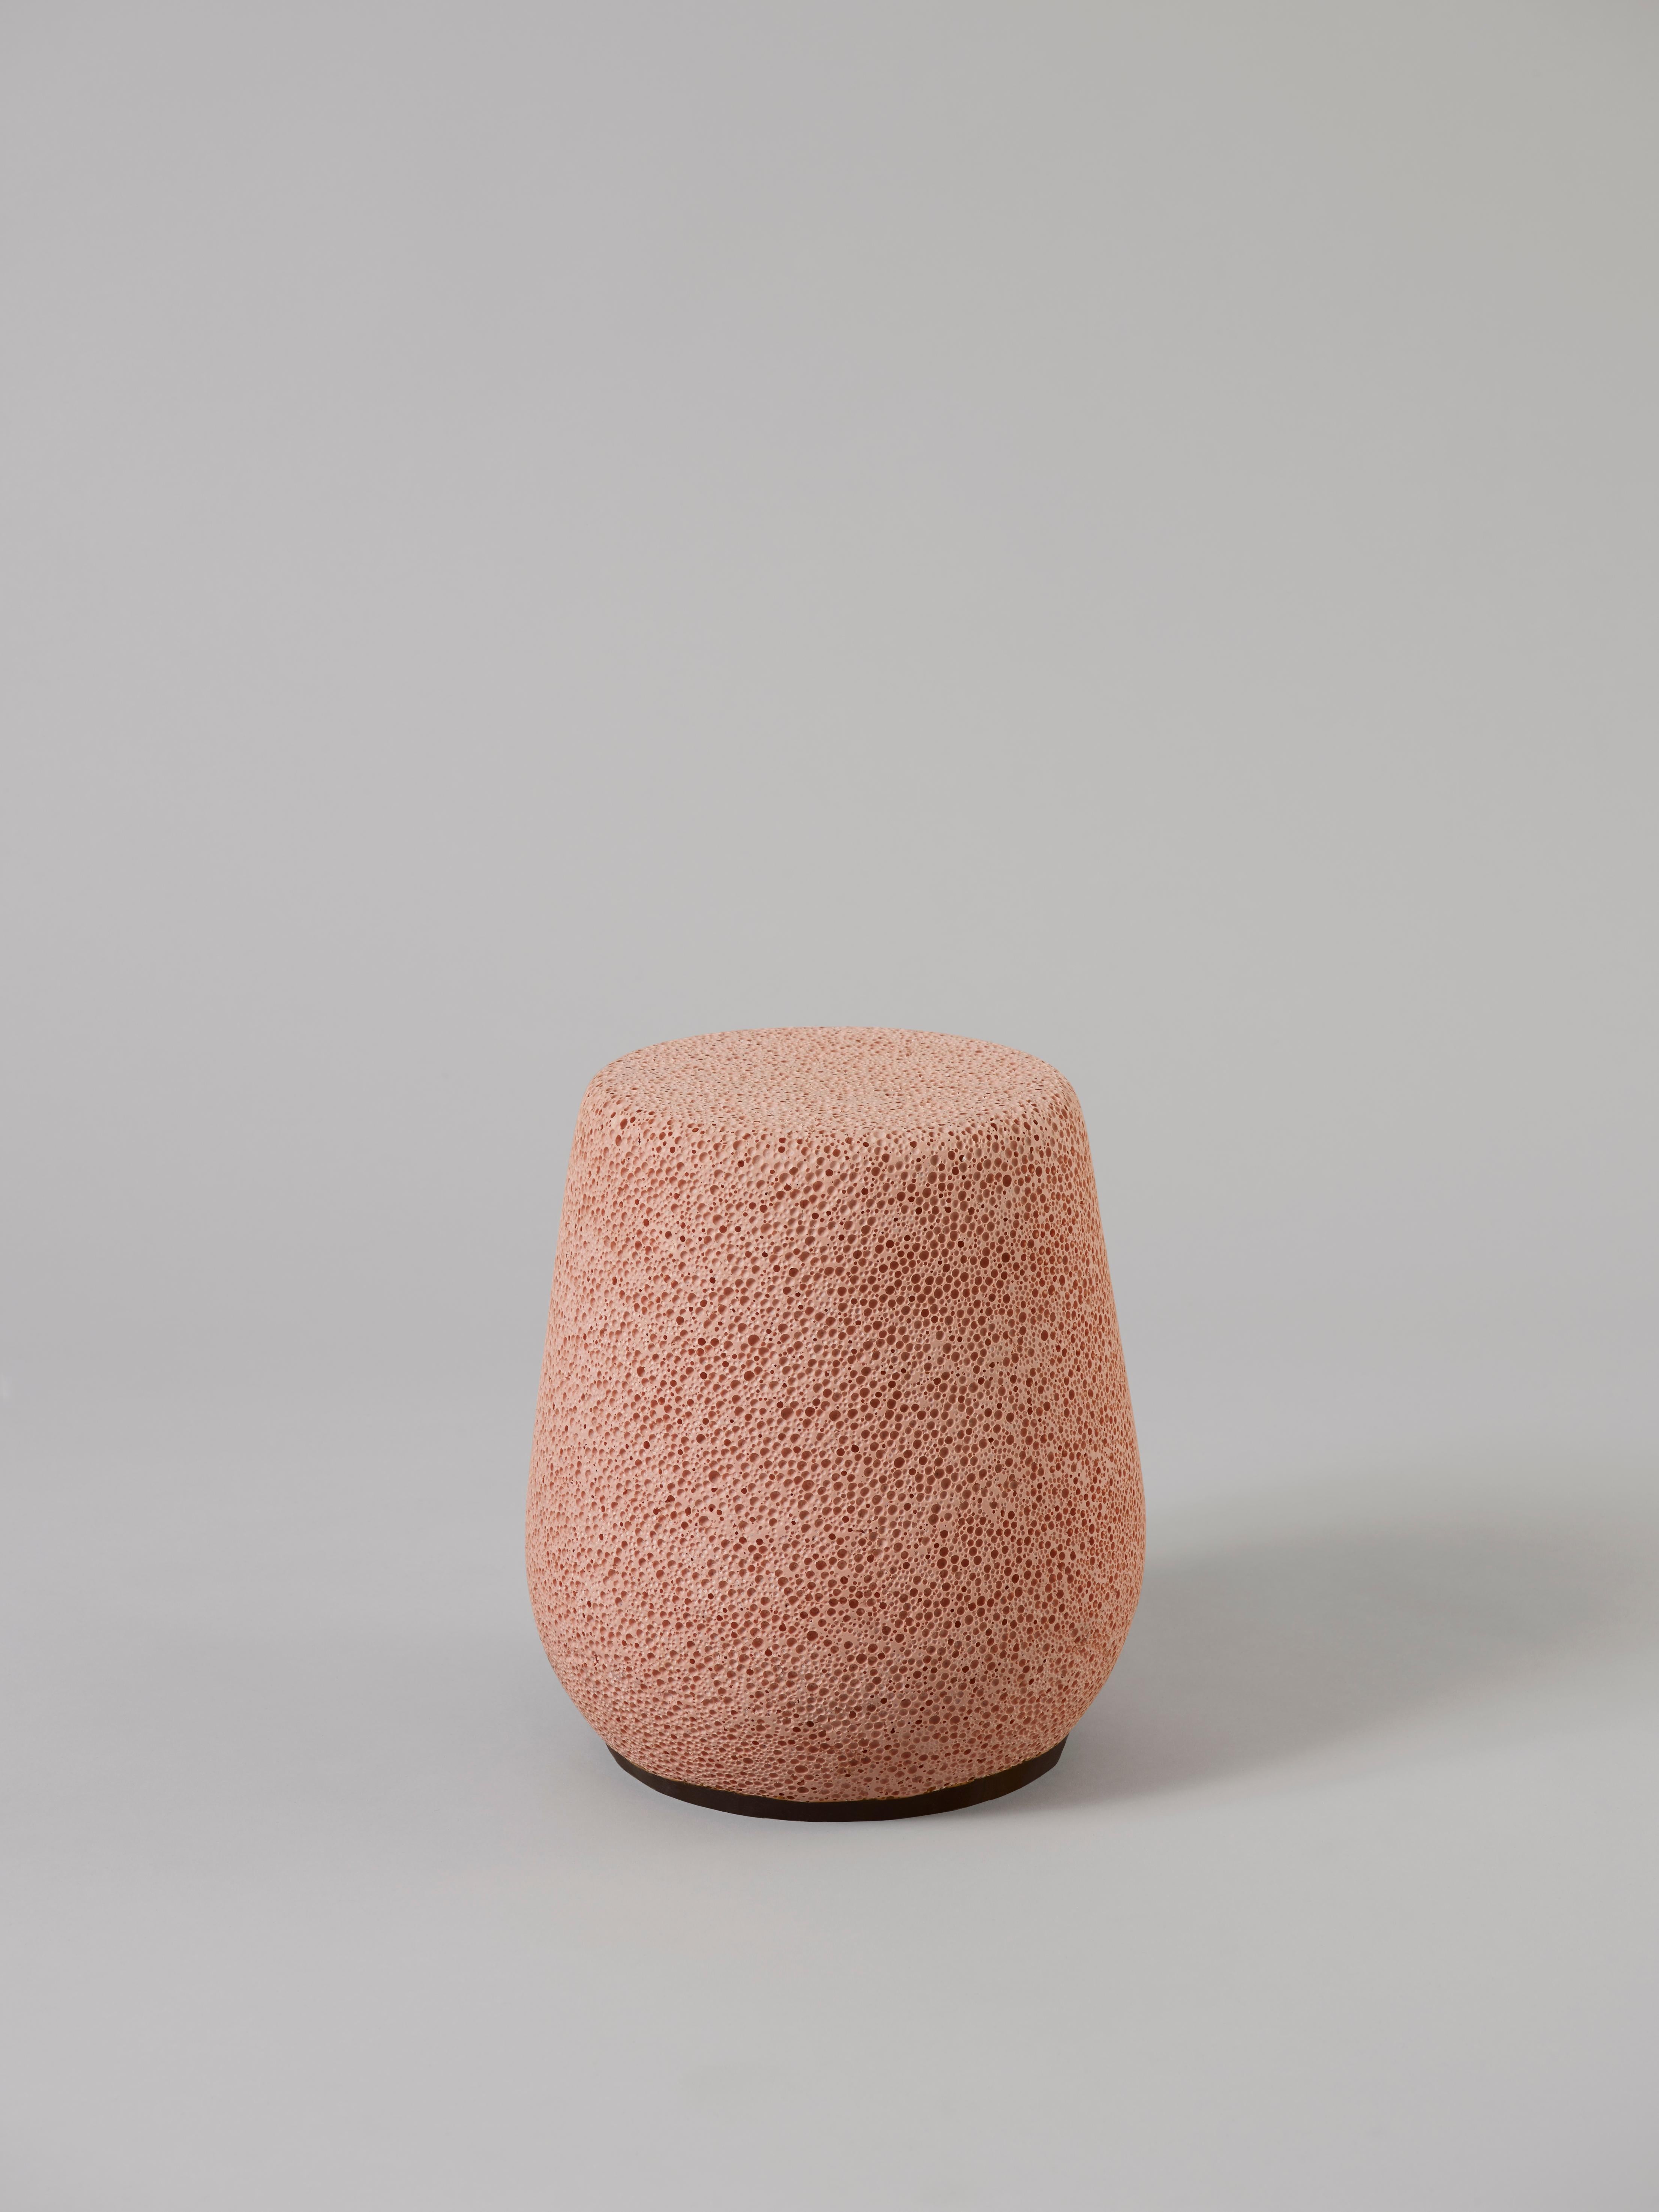 Evoking a beehive or or an intriguing mineral like pumice stone, this ‘Lightweight Porcelain’ stool is part of Djim Berger’s ‘Lightweight Porcelain’ collection exclusively produced for Galerie BSL since 2010. Djim Berger is a graduate of the